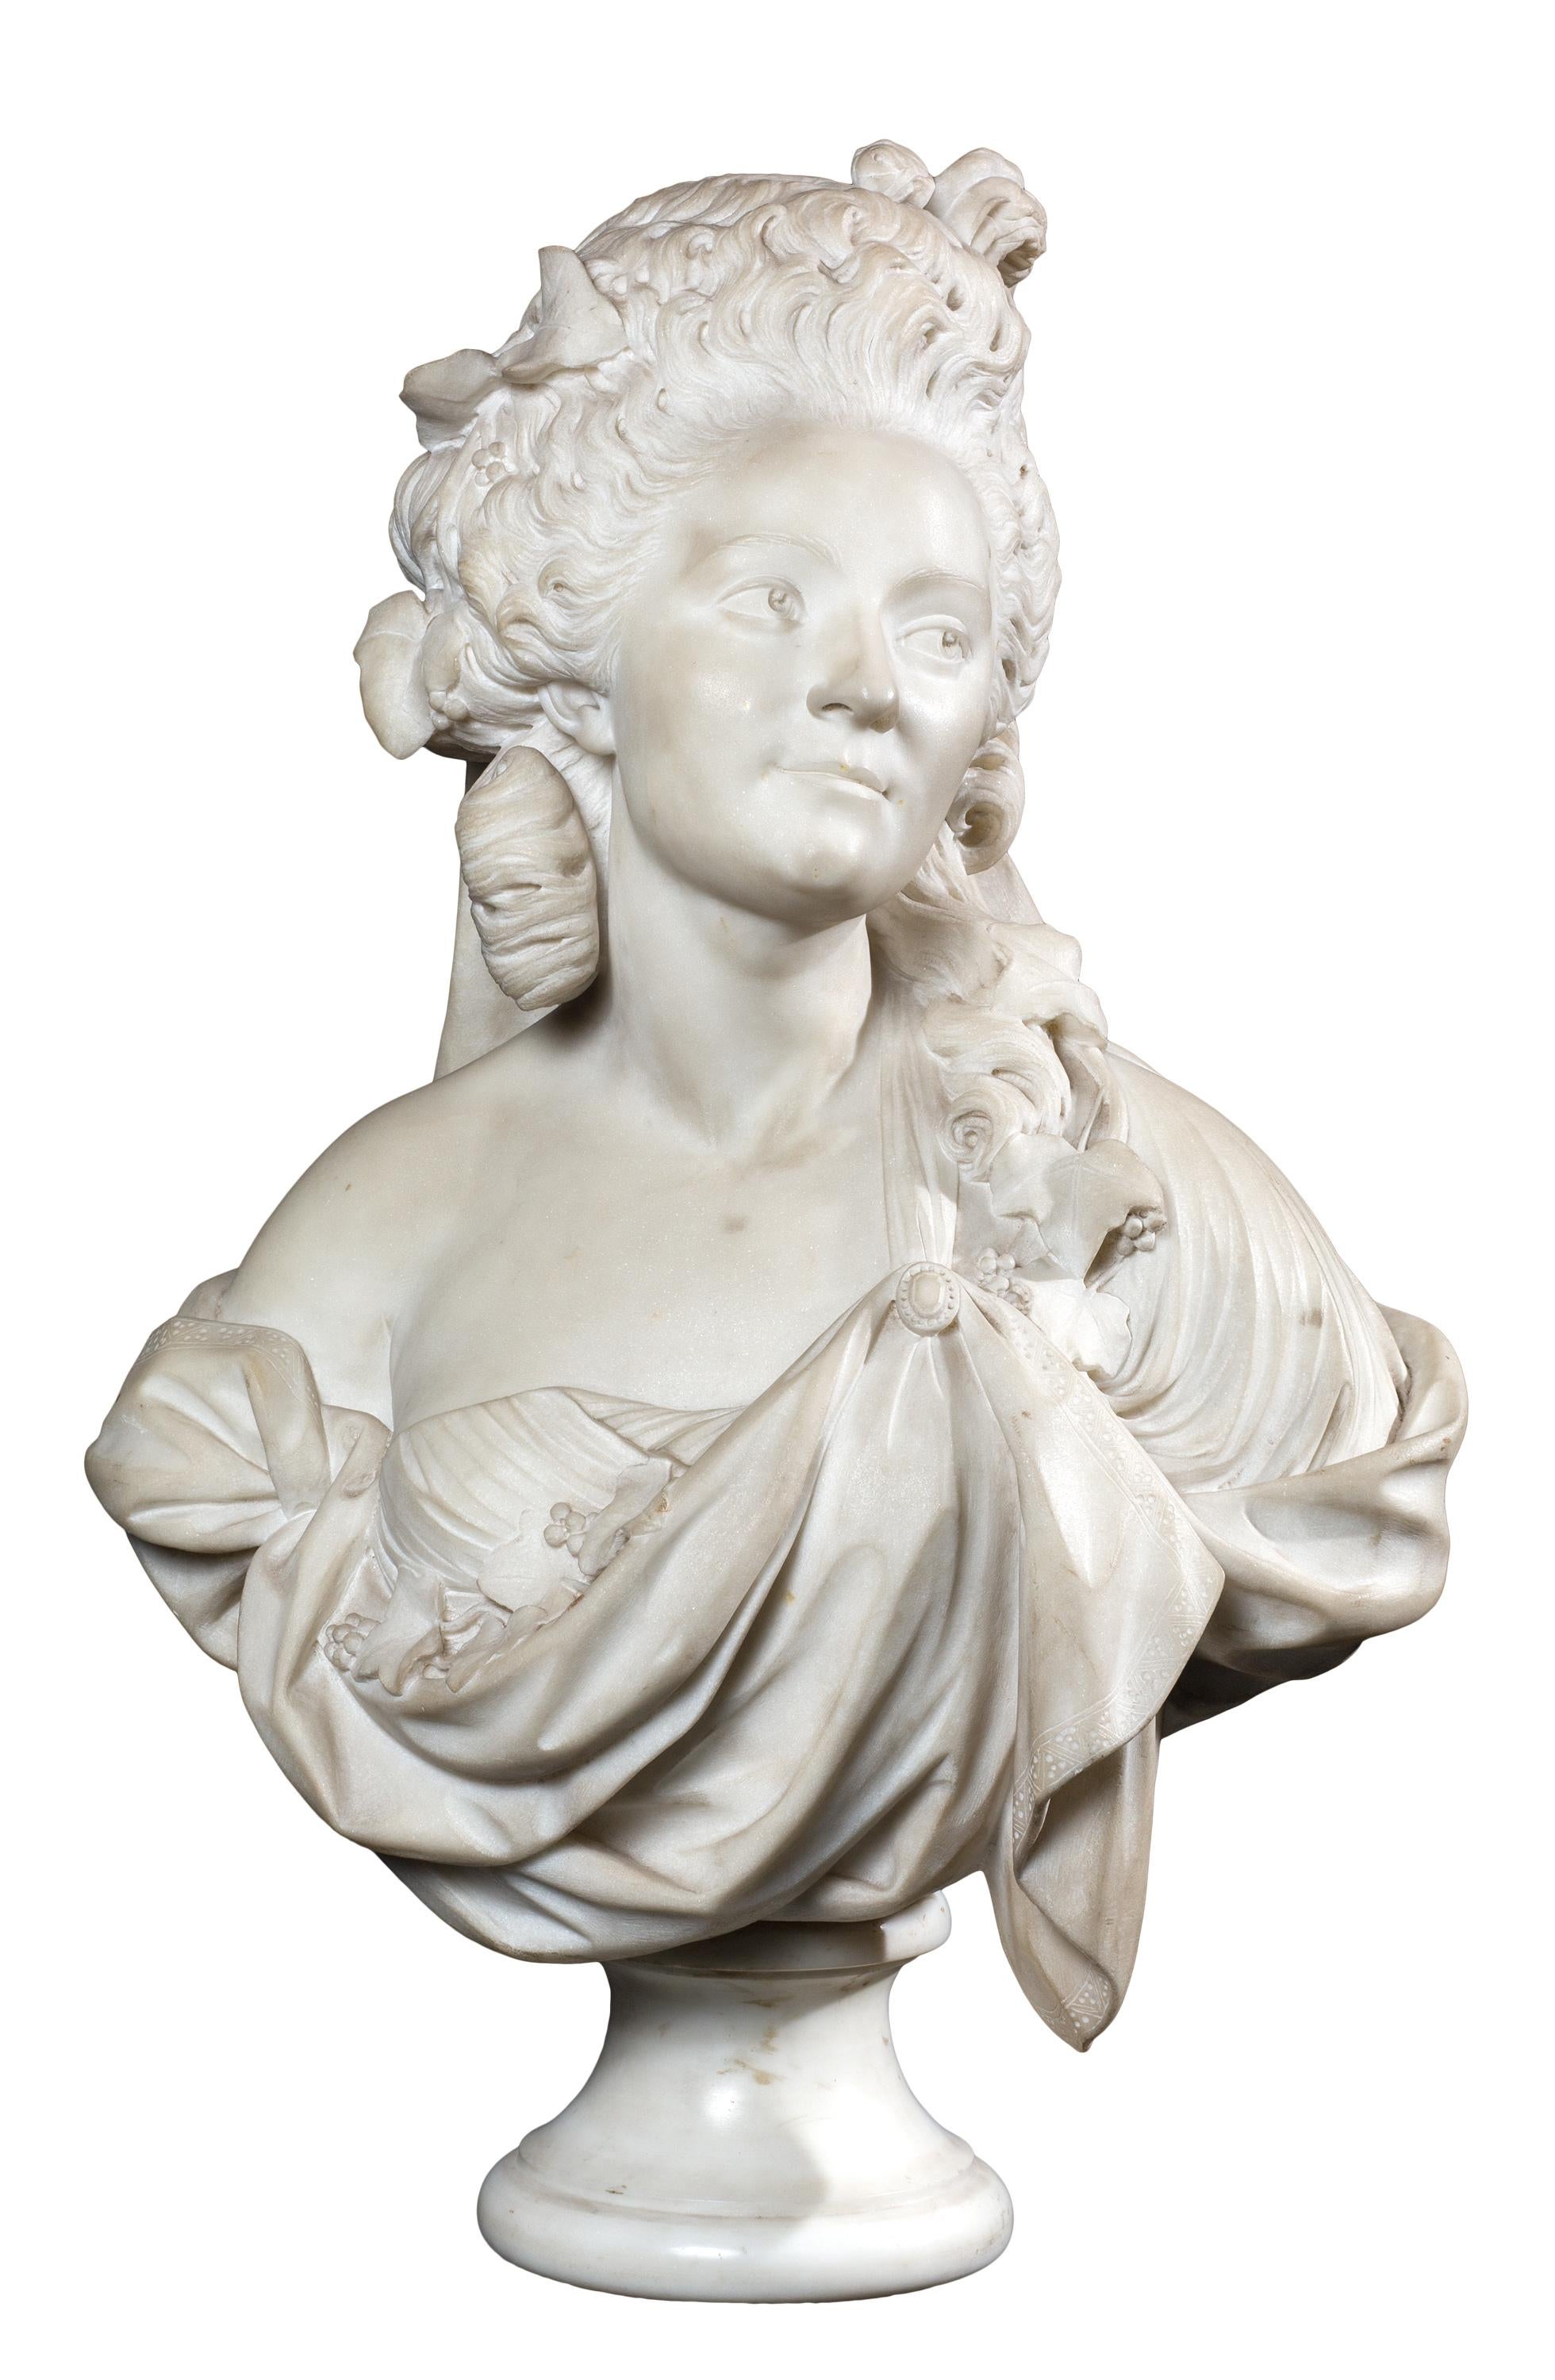 This expressive 18th century marble portrait bust is of Marie-Madeleine Guimard (1743-1816), a successful dancer and one of the most famous courtesans of pre-Revolutionary France. The bust is unsigned, but identical to one in the collection of